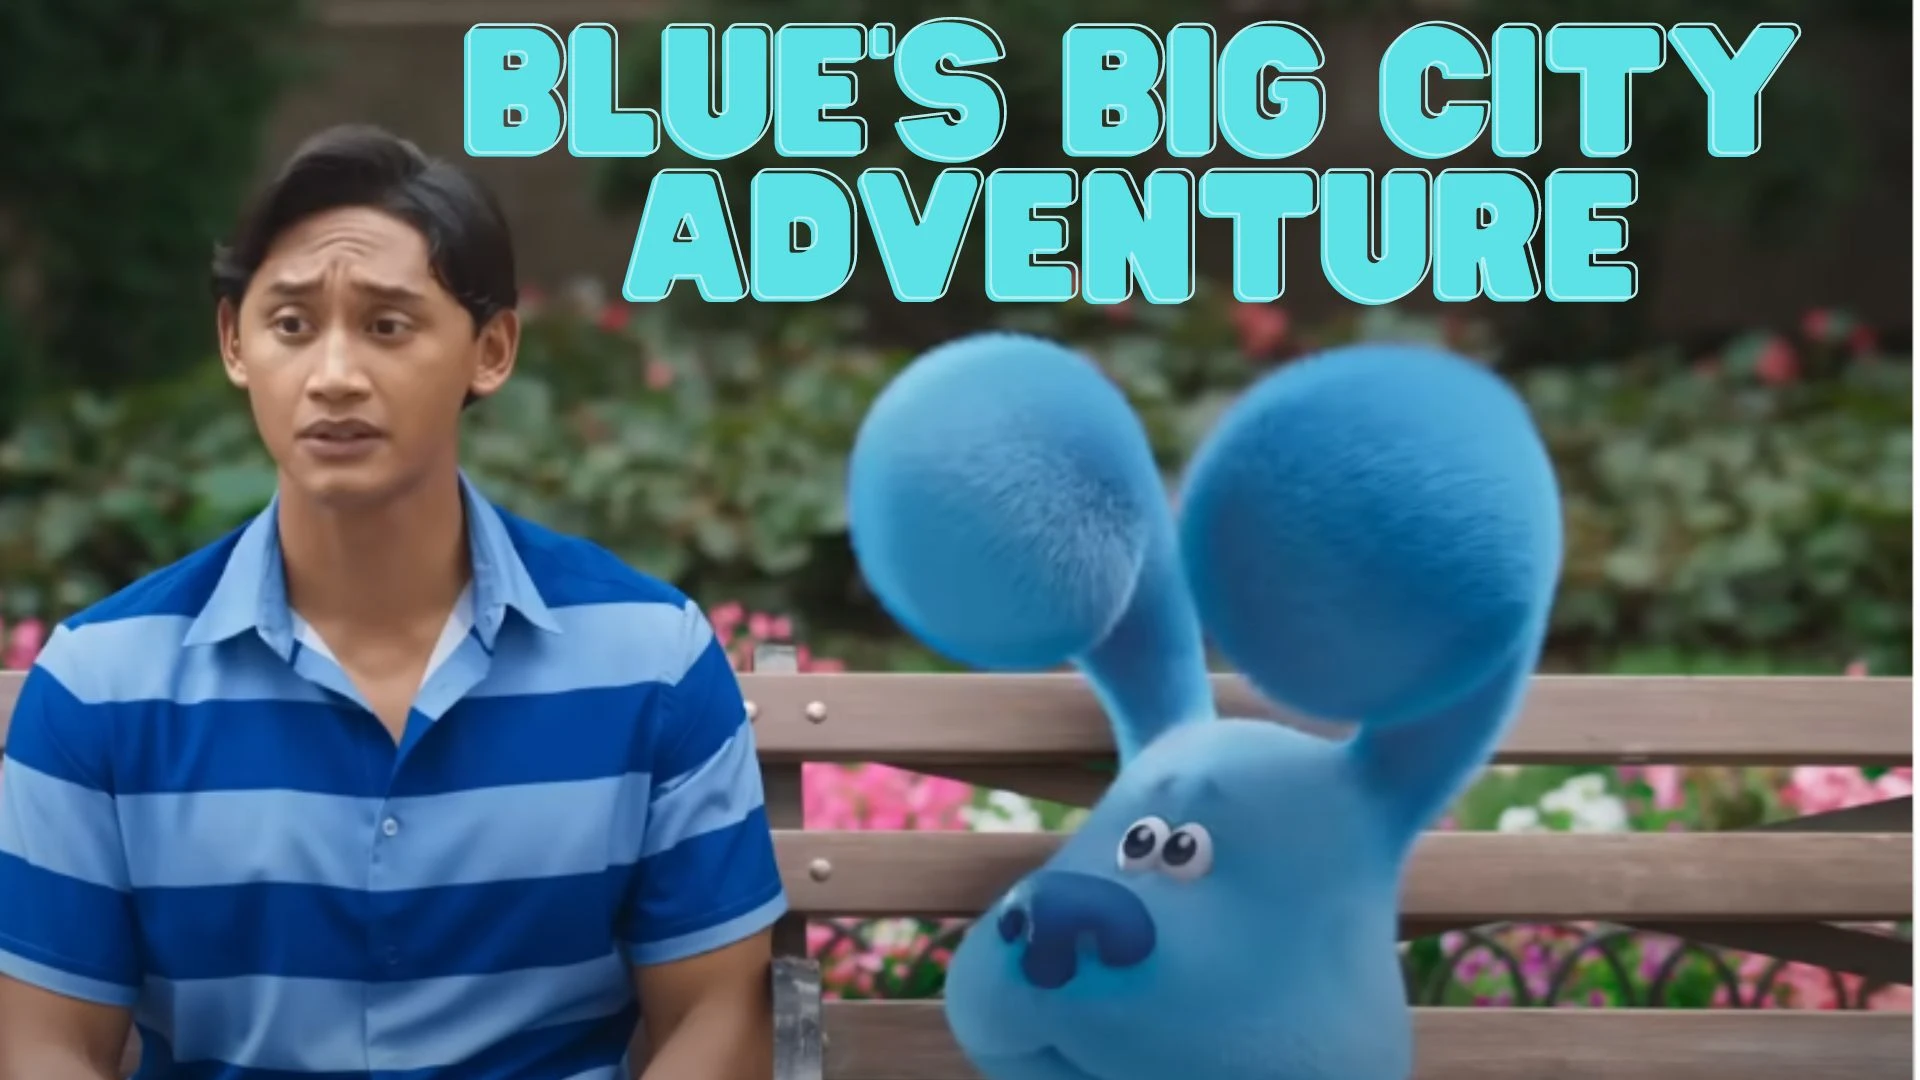 Blue's Big City Adventure Parents Guide and Age Rating 2022